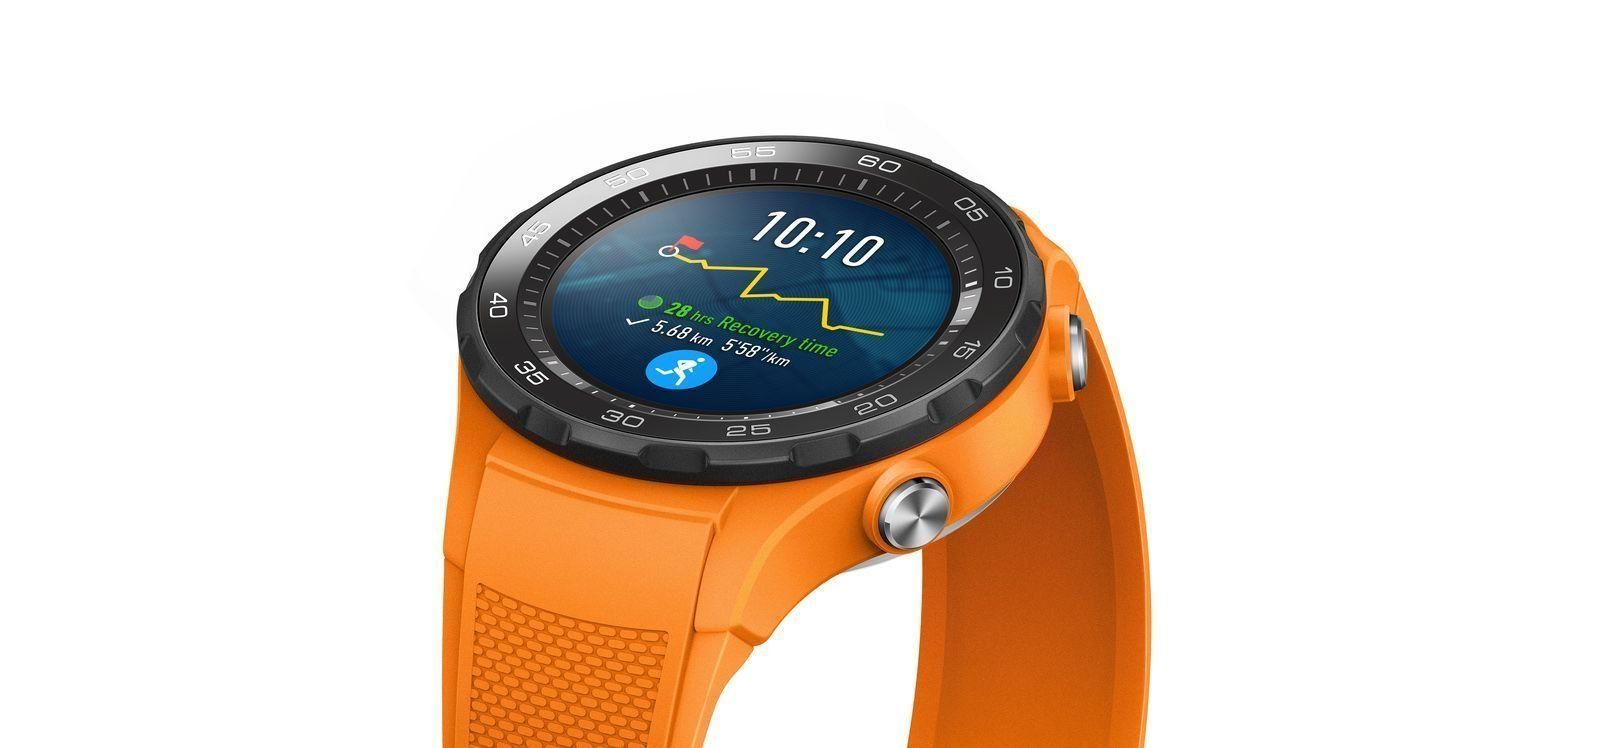 Smart watch Huawei Watch 2 Sport - advantages and disadvantages